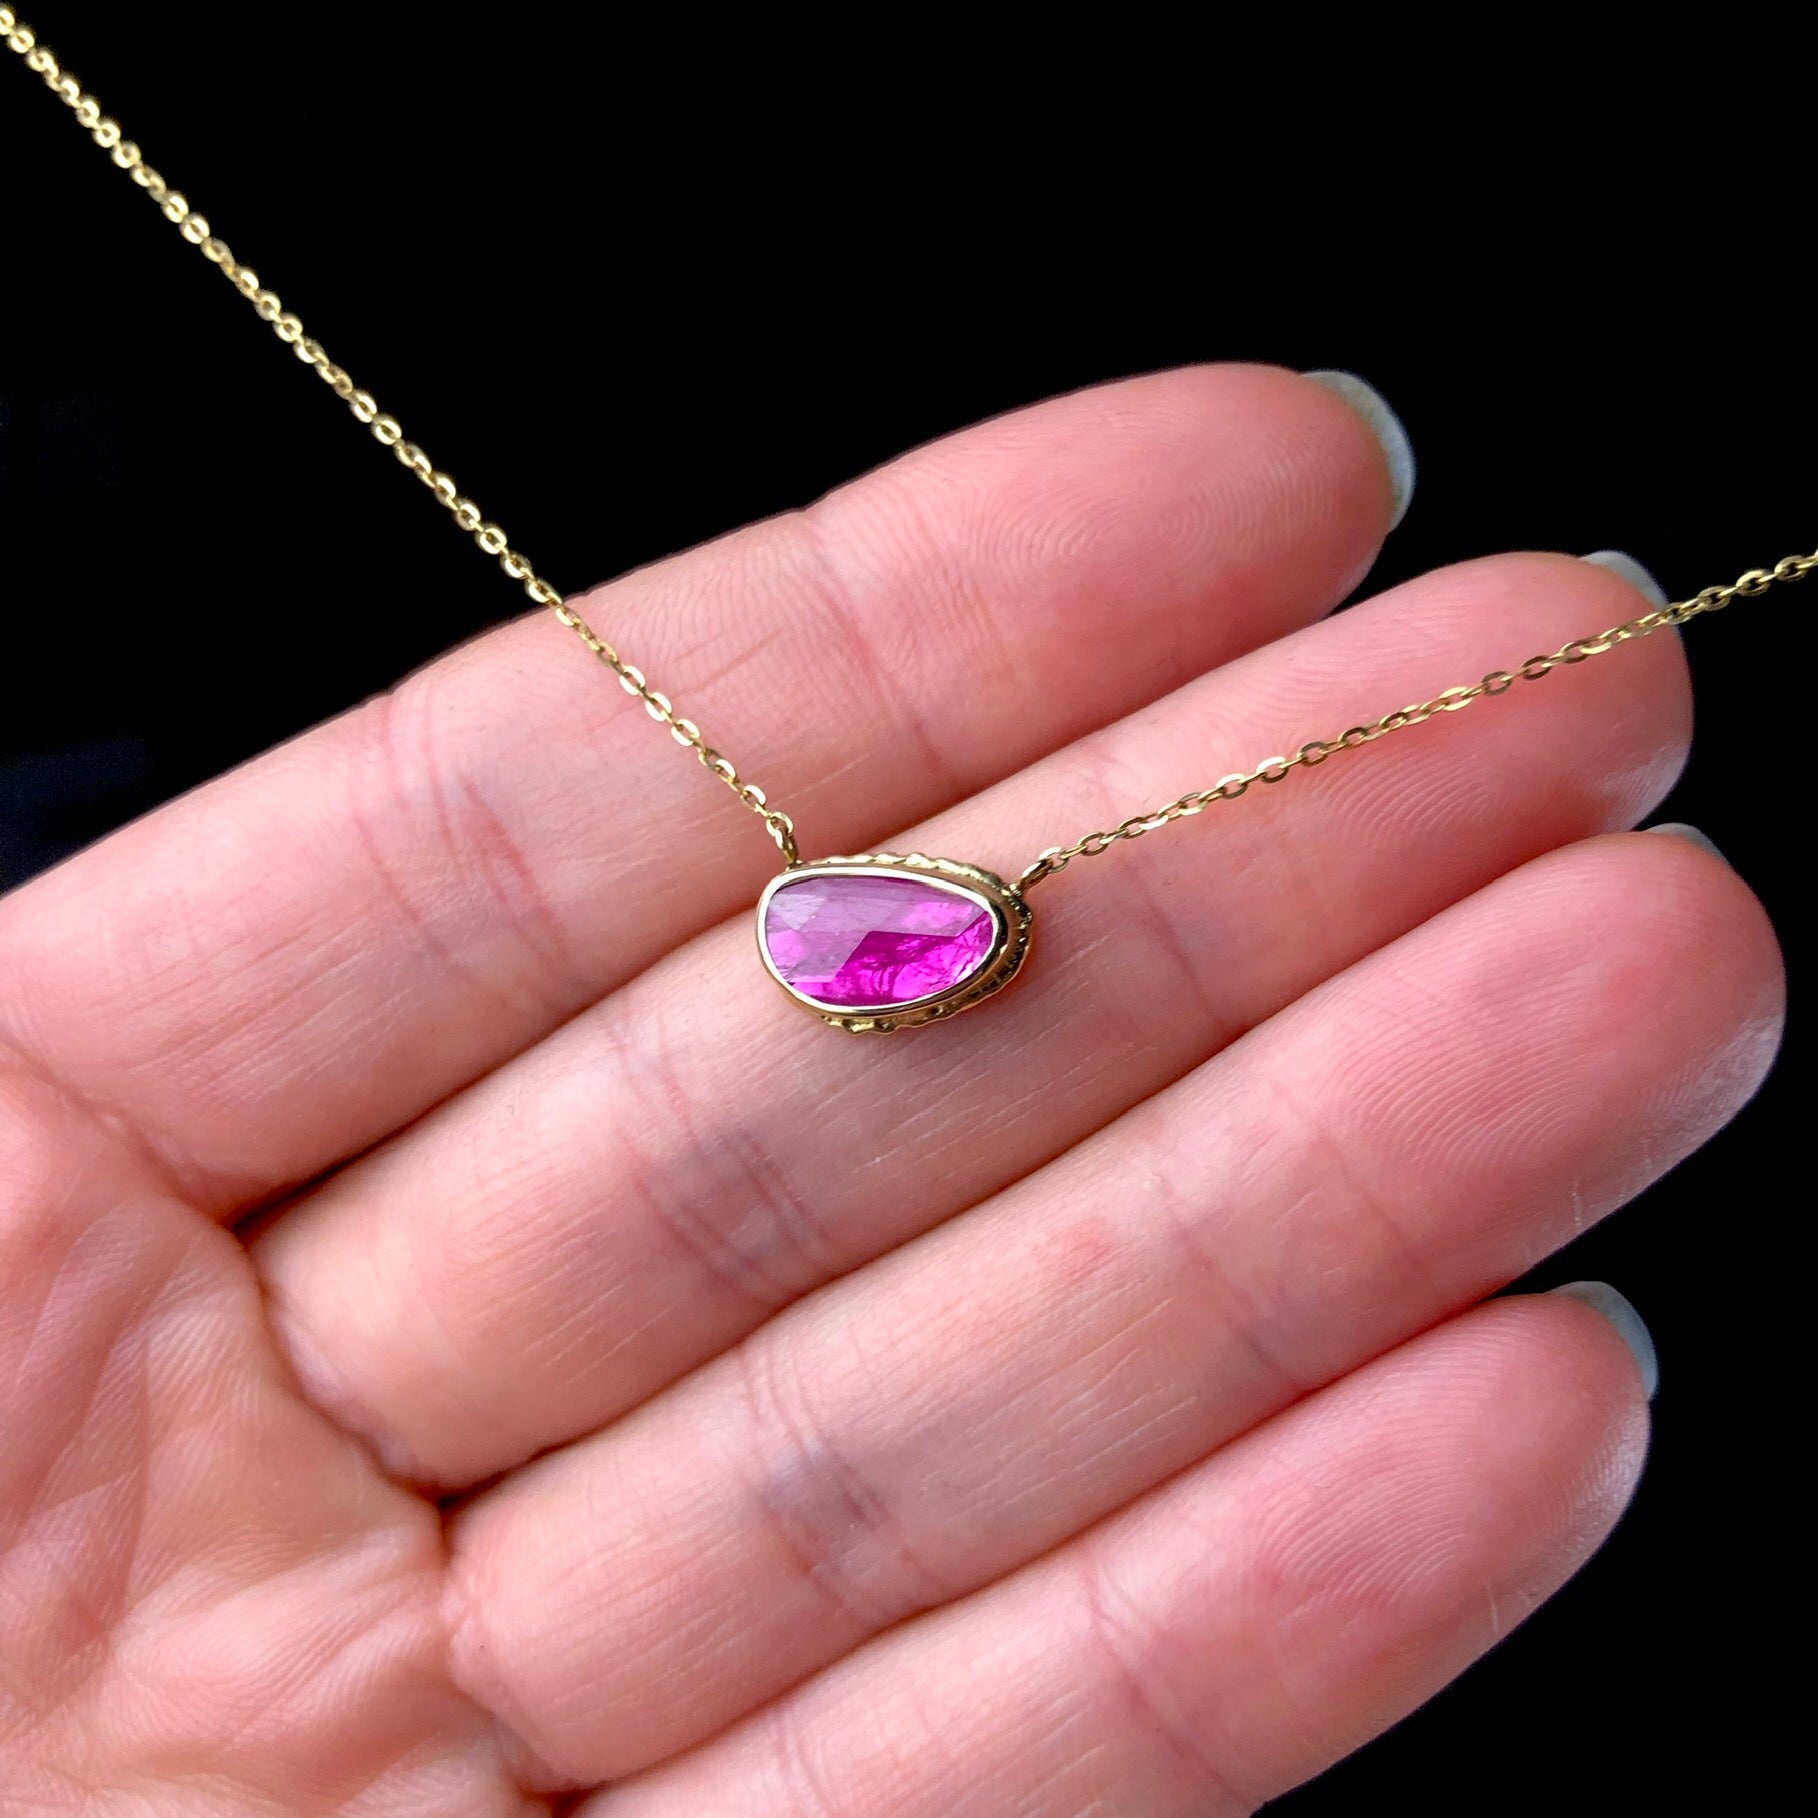 Pink stone necklace on gold chain shown agains hand